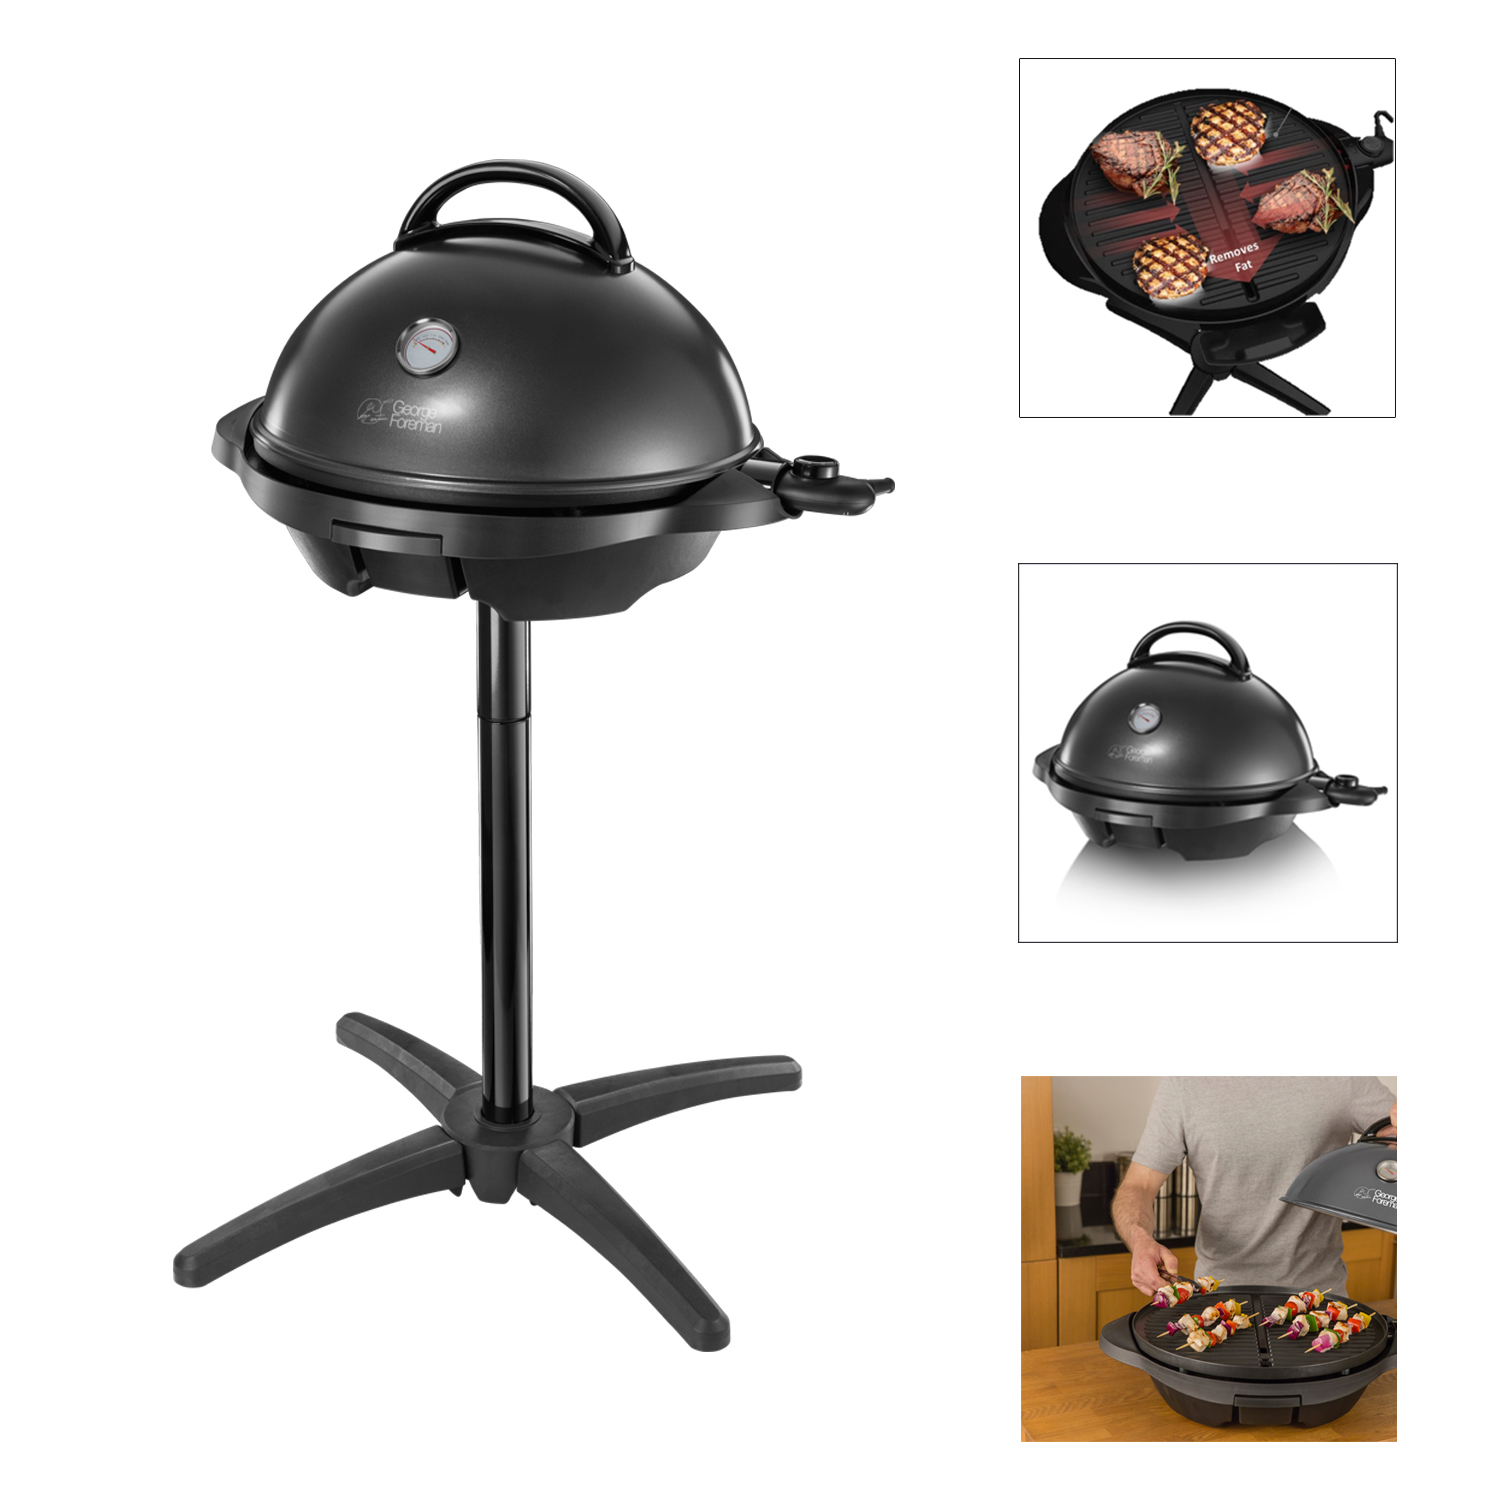 Russell Hobbs Electric Barbecue Grill With Stand, Indoor/Outdoor, 22460-56